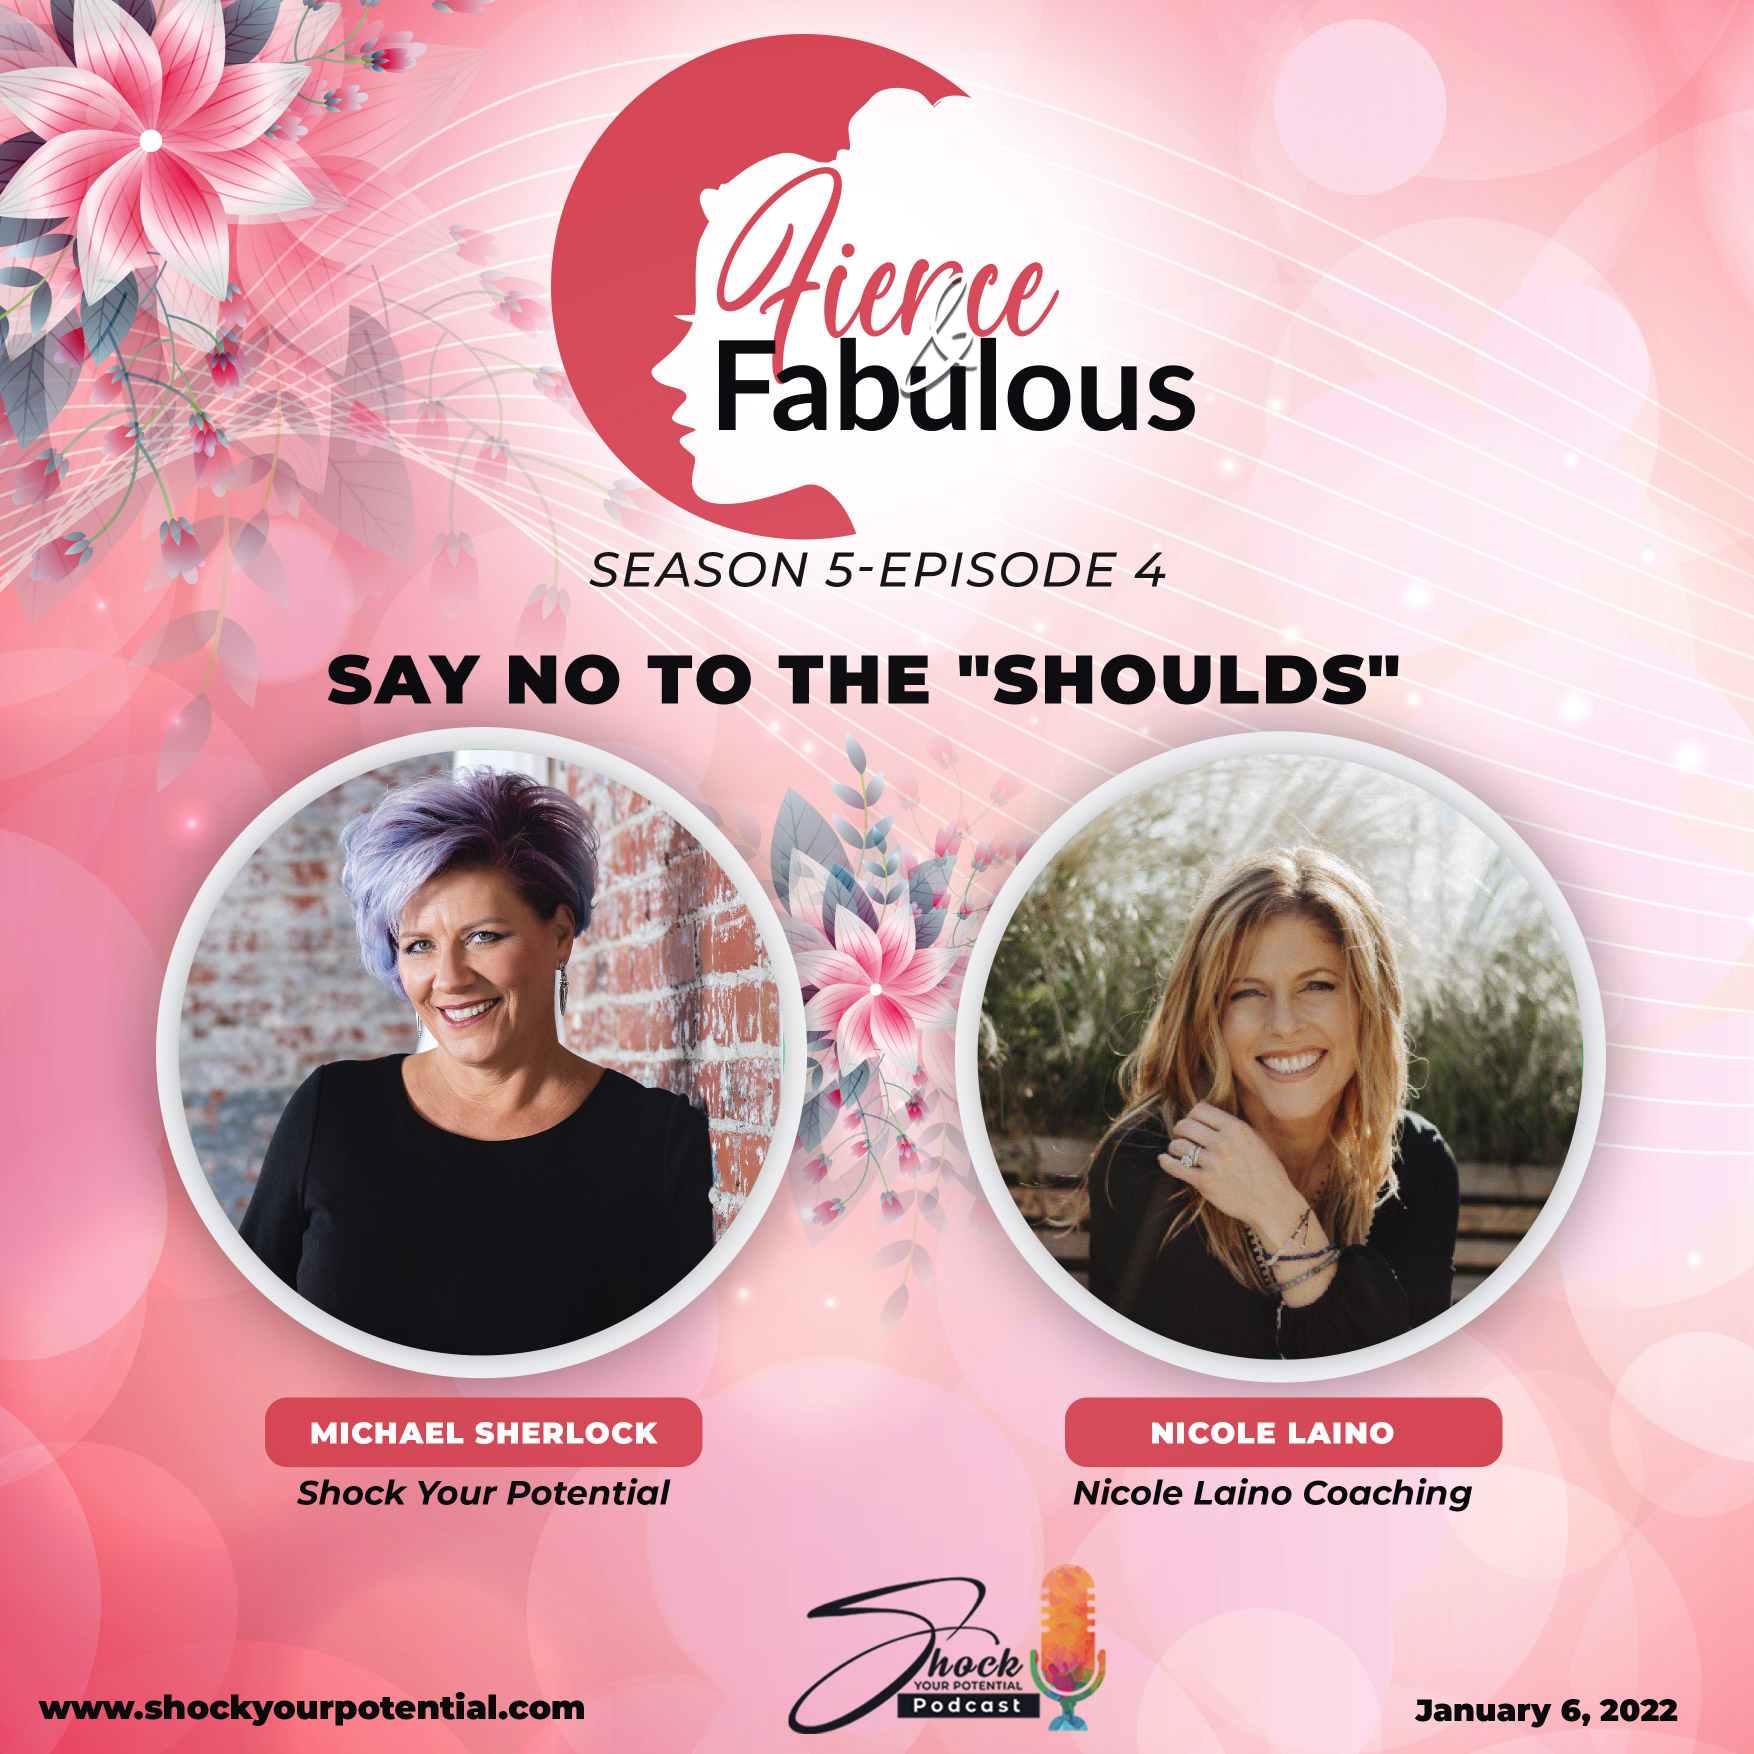 Say No To The ”Shoulds” – Nicole Laino